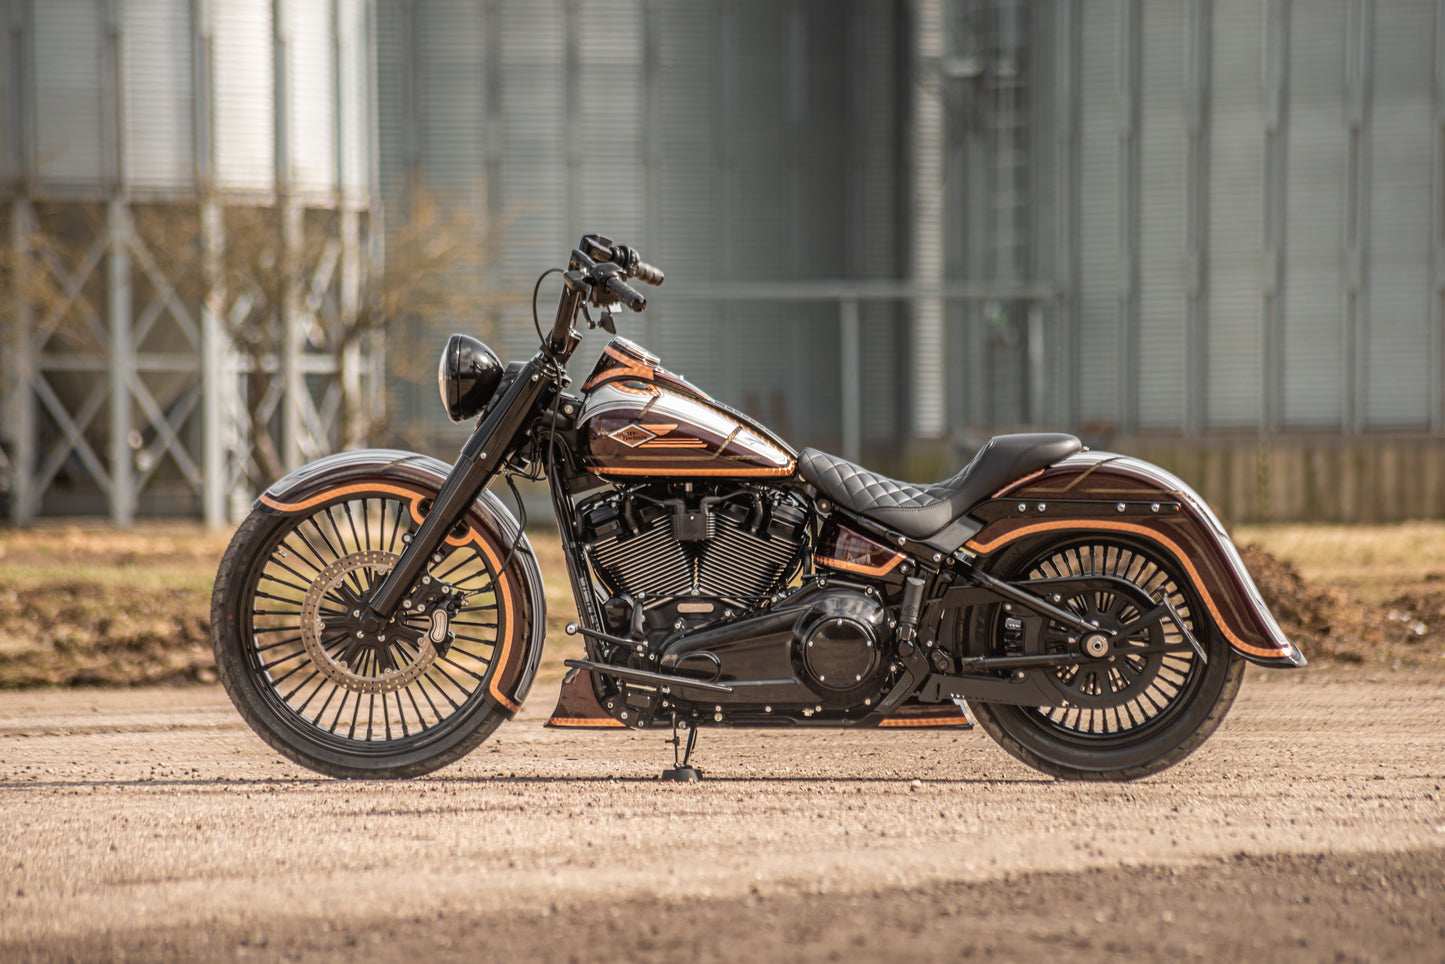 Harley Davidson motorcycle with Killer Custom rear fender with tip from the side in an industrial environment